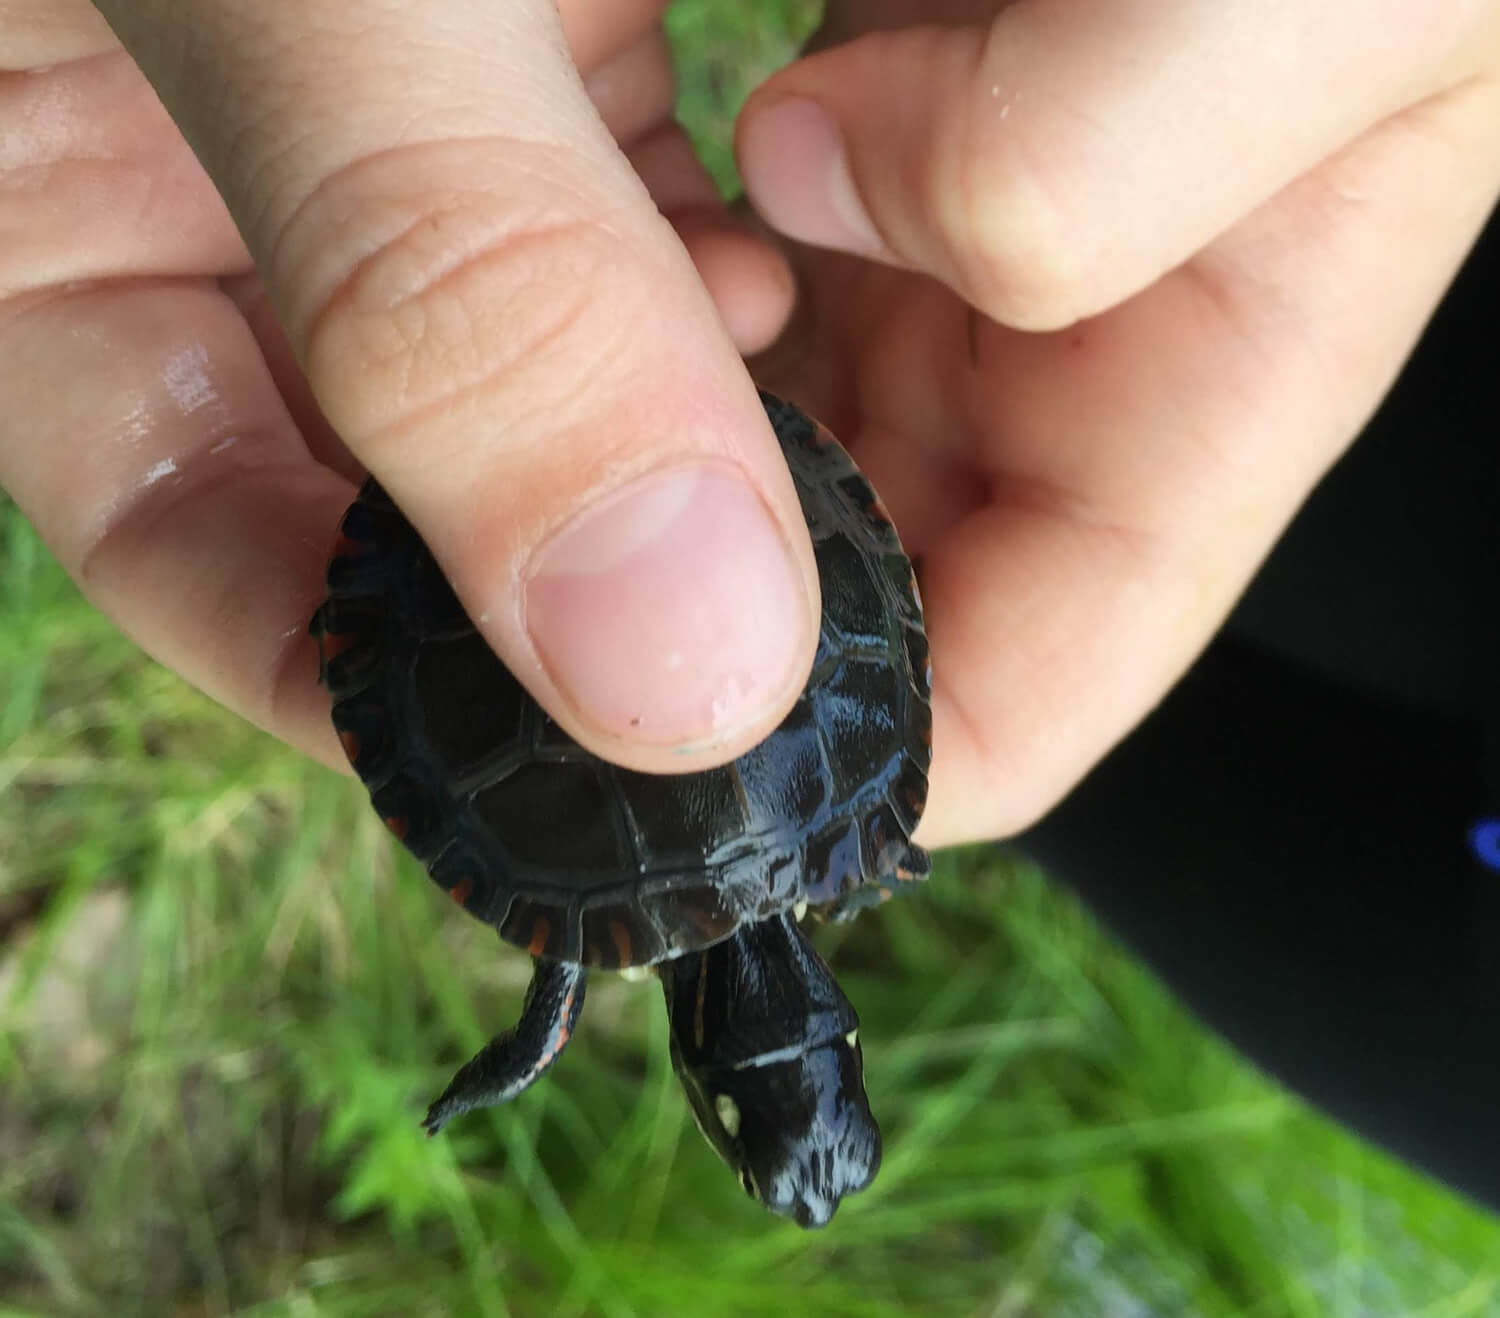 Small turtle in hand